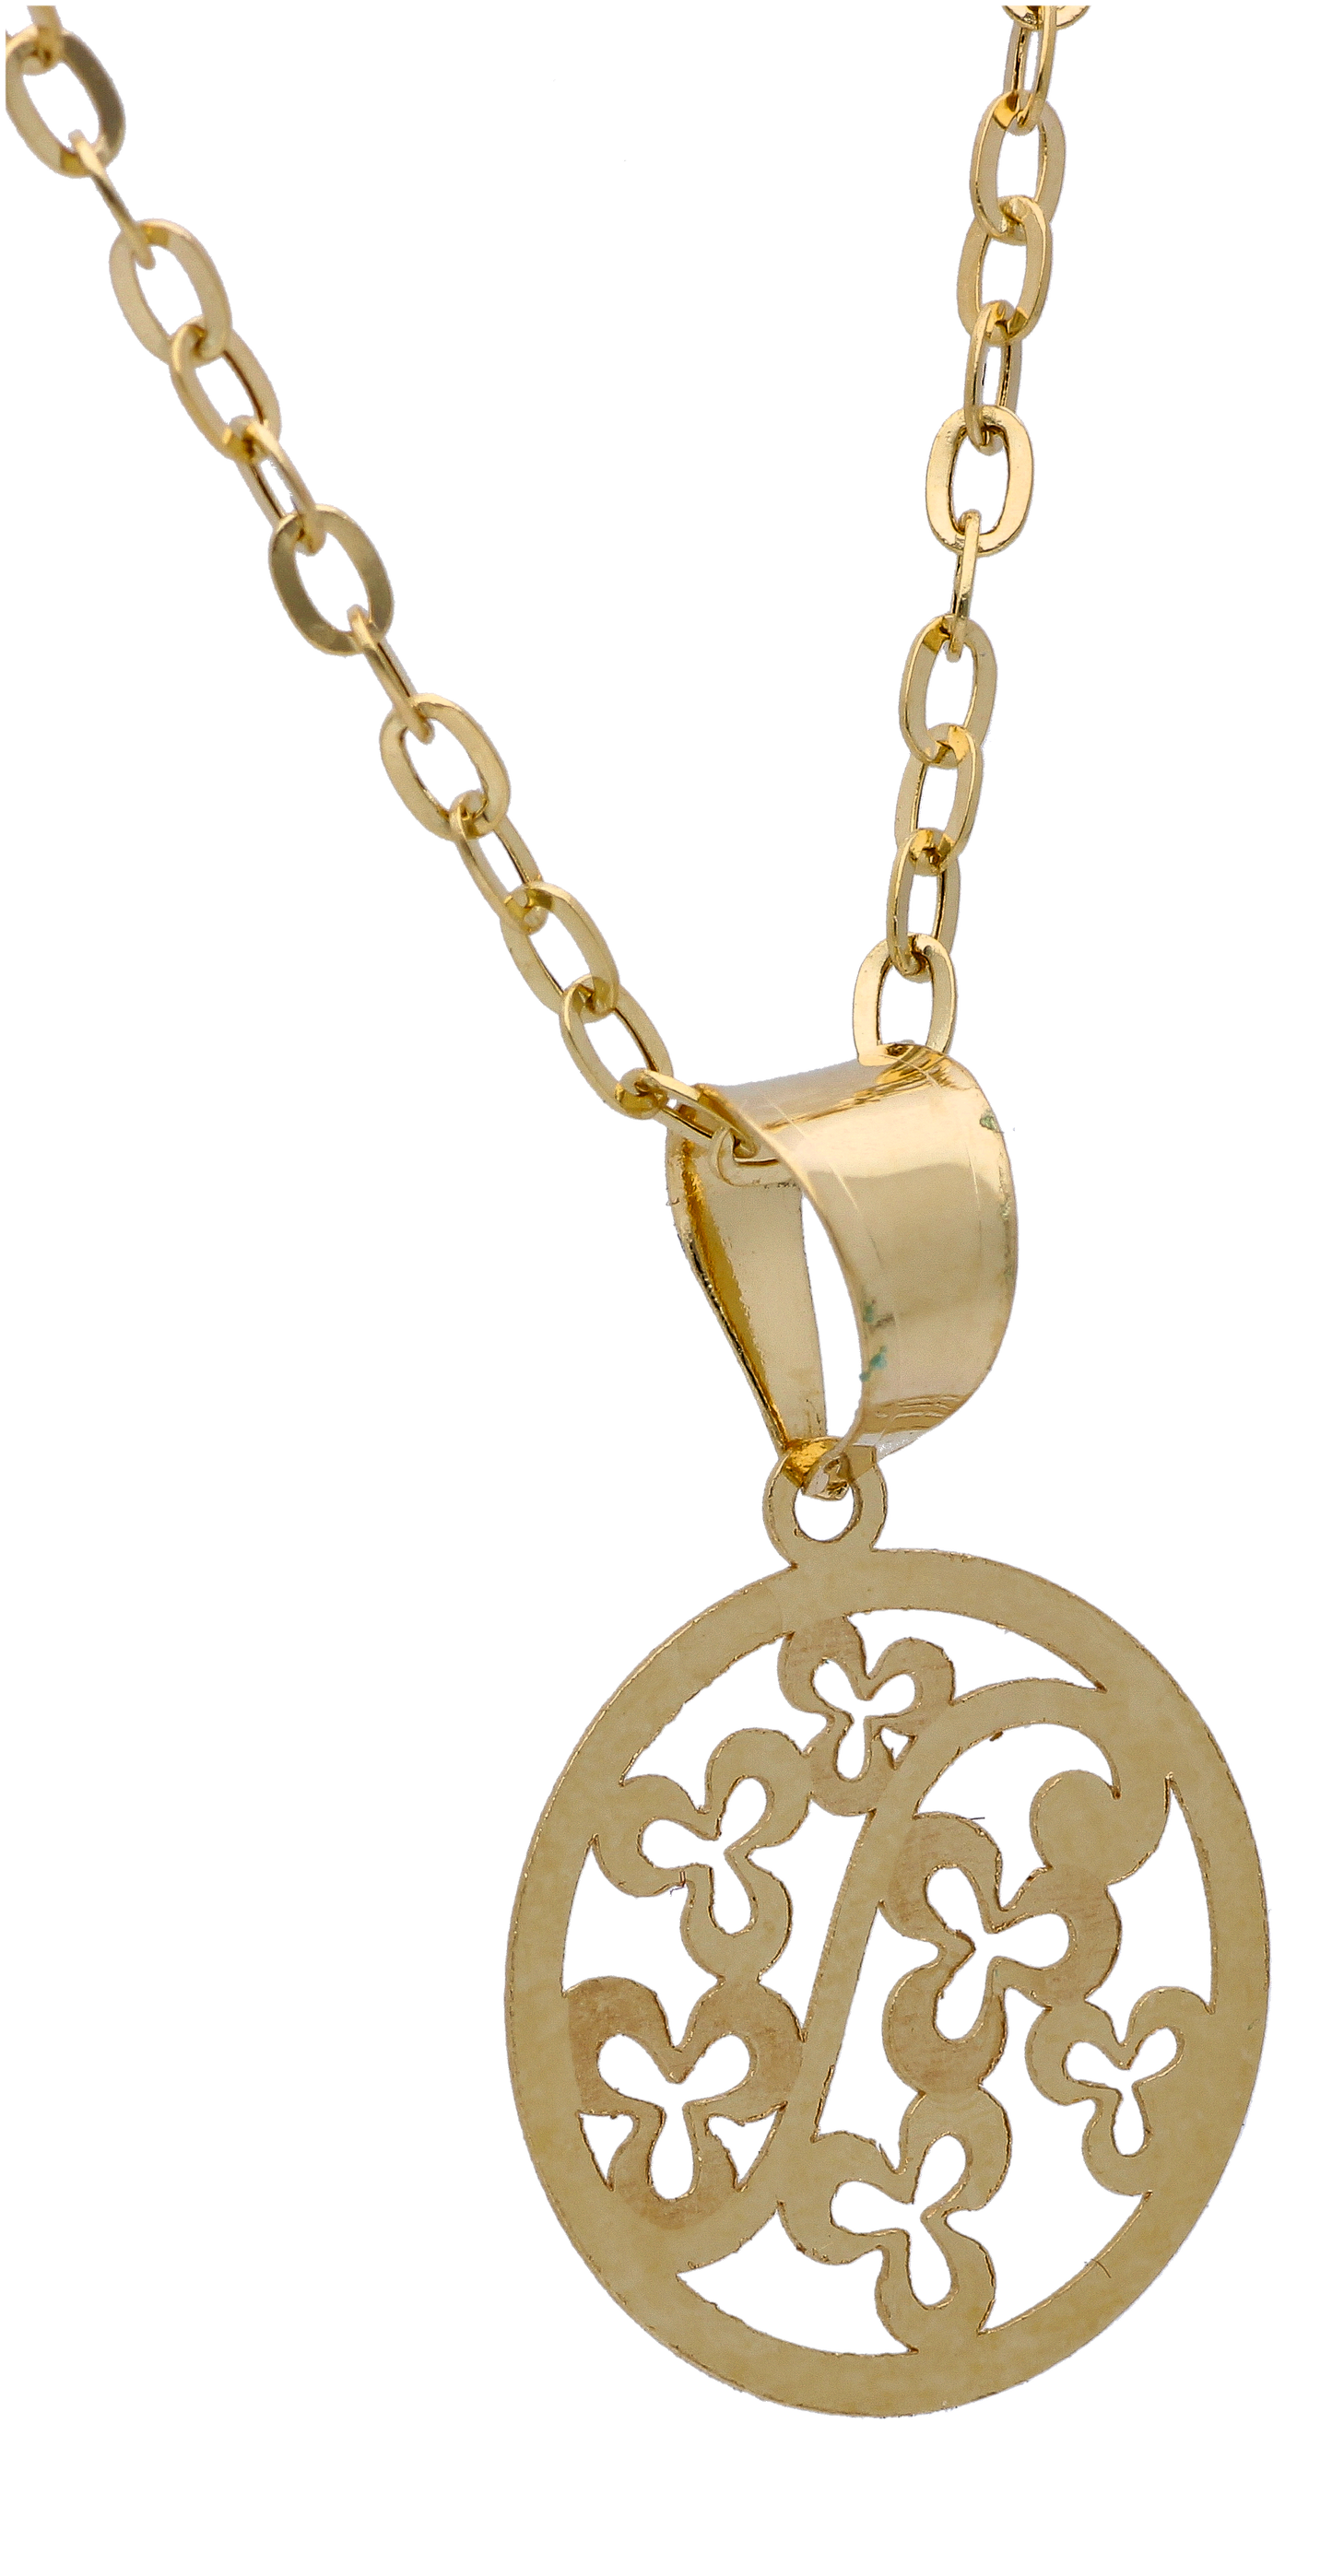 Gold Necklace (Chain with Hollow Floral Pendant) 18KT - FKJNKL18KU6300